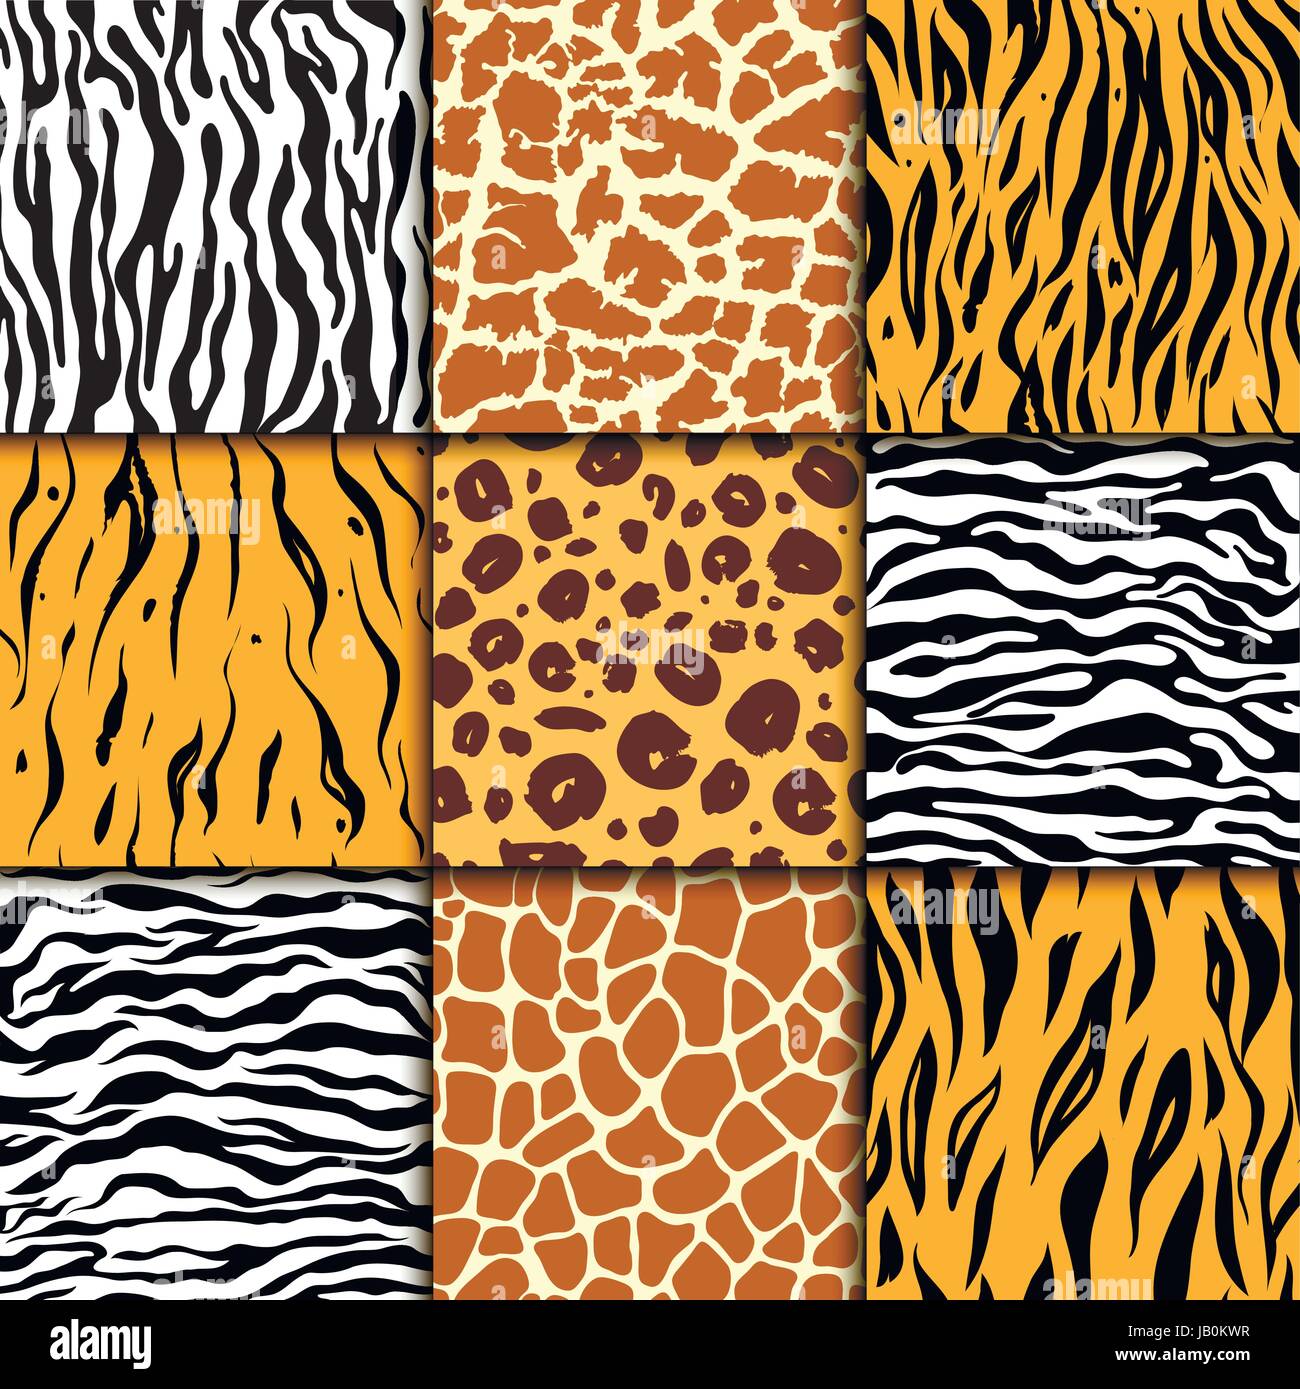 Seamless pattern with cheetah skin. vector background. Colorful zebra and tiger, leopard and giraffe exotic animal print. Stock Vector